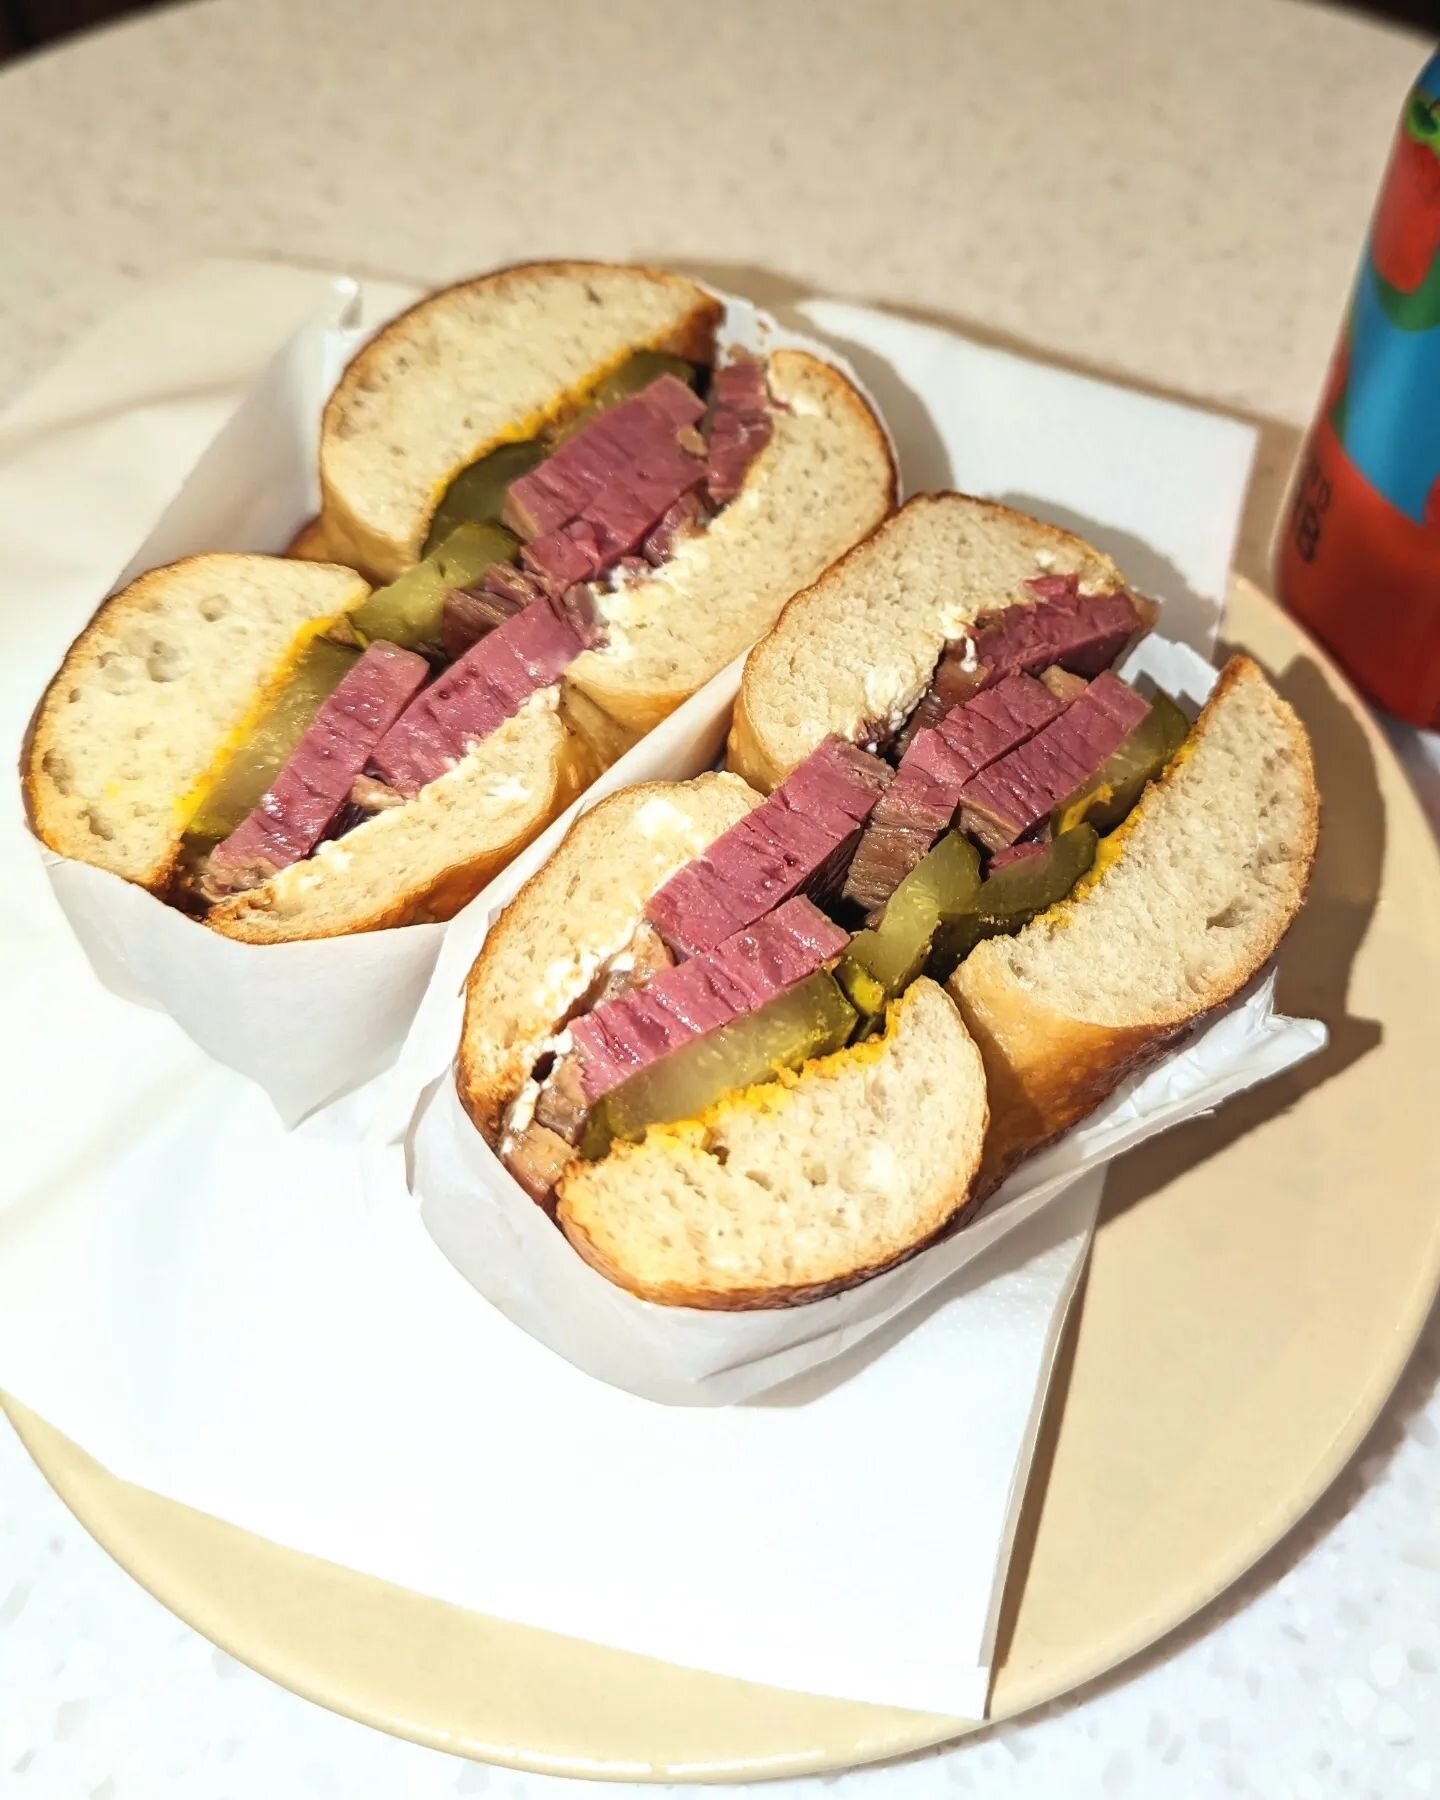 Always a classic. The Salt Beef bagel hits the spot every time. A 7 day brine and slow cooked for 8 hours, the salt beef just falls apart. Add crunchy gherkins and a little kick from the mustard and you have the perfect combo. 
#saltbeef #bagels